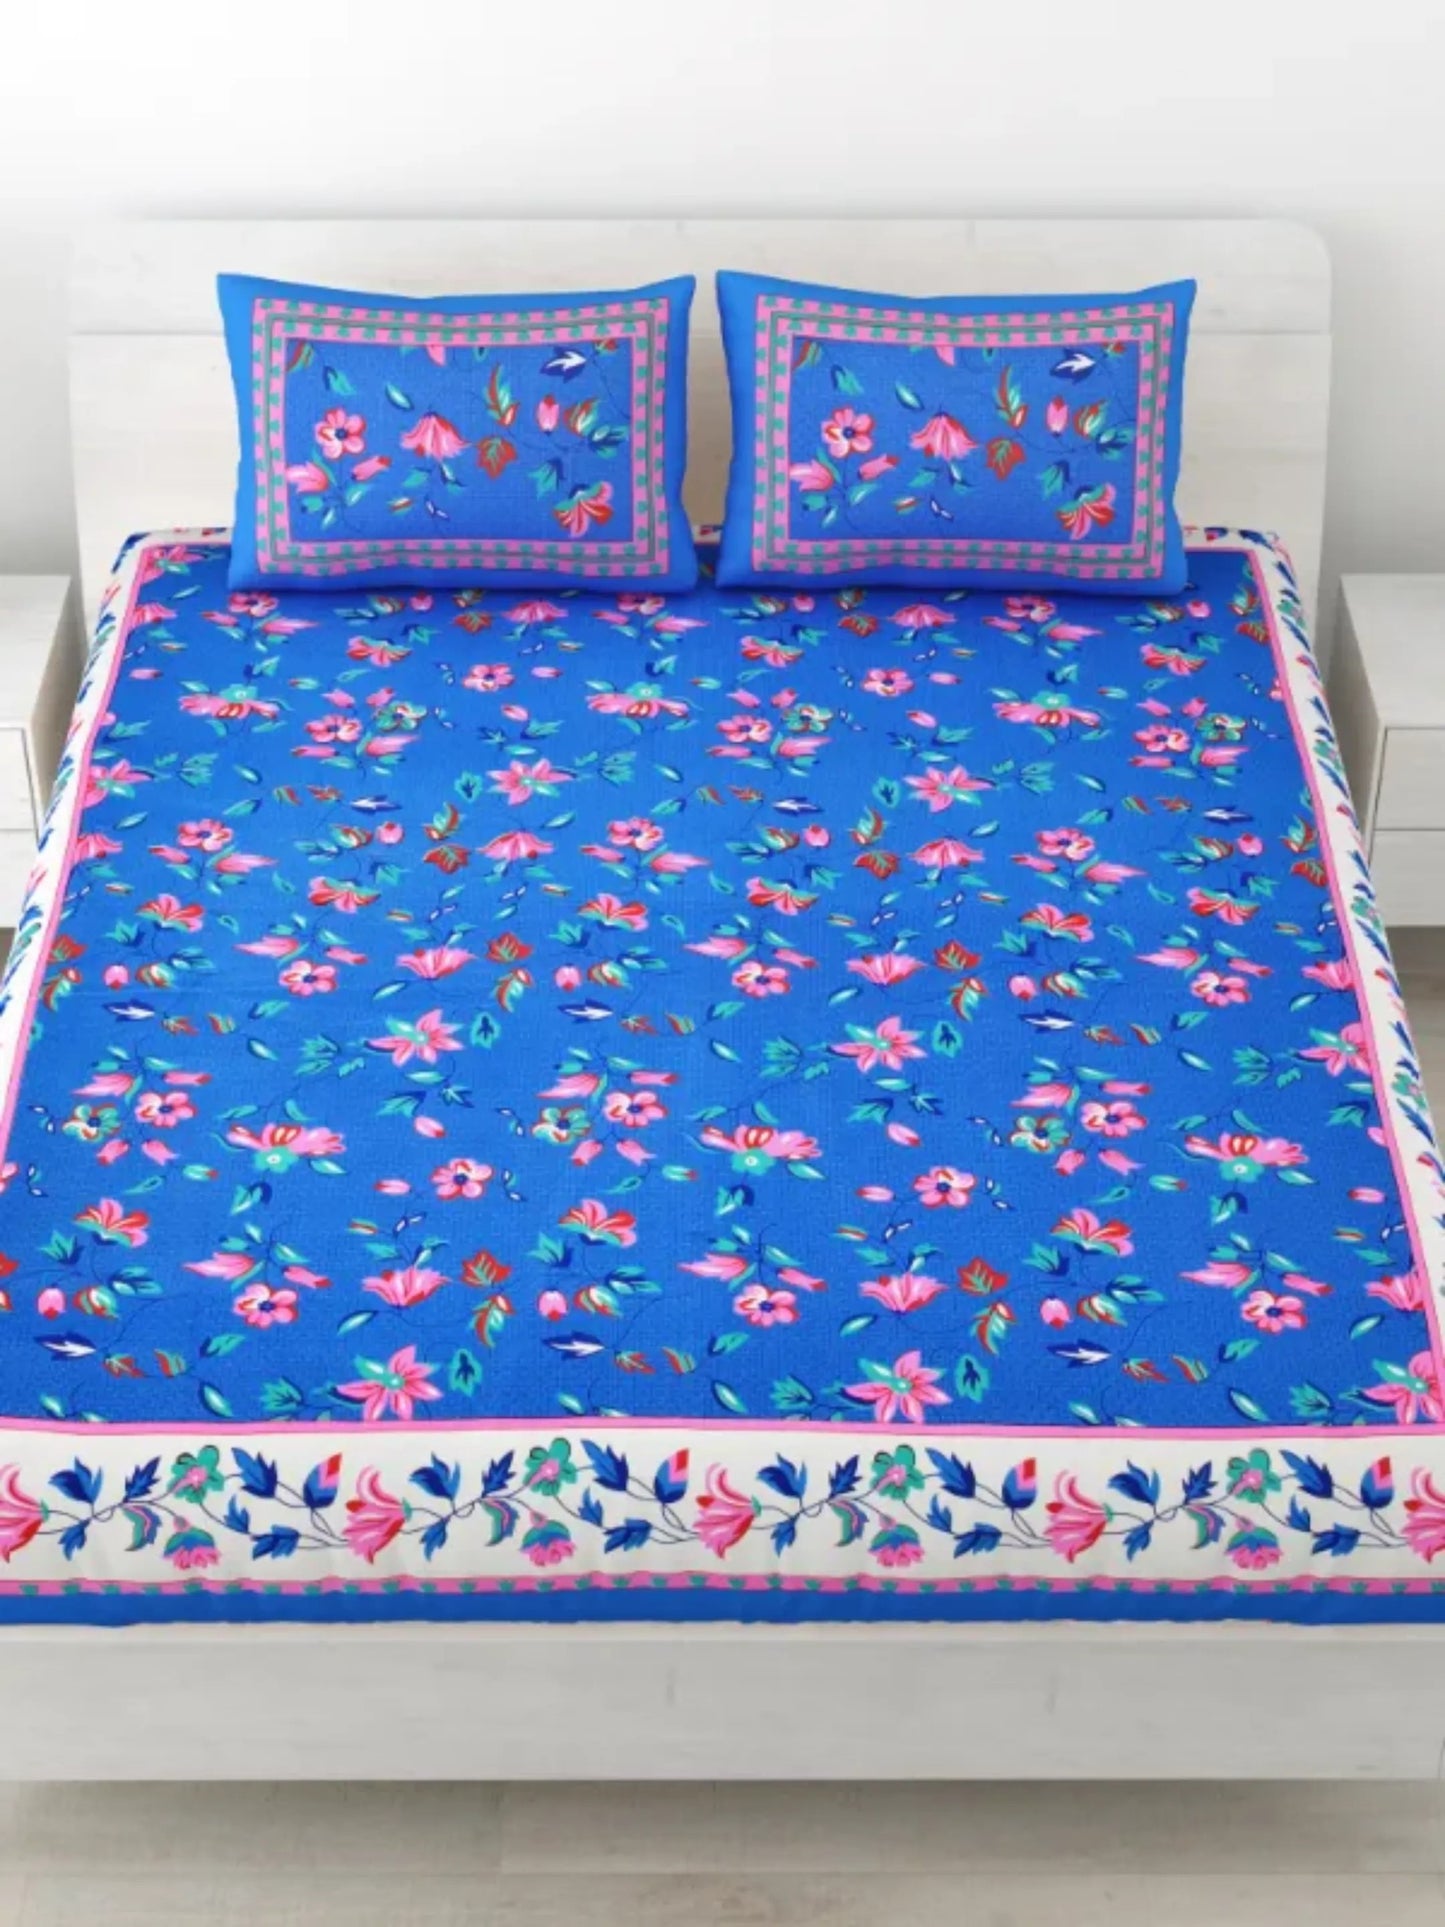 LIVING ROOTS Double Bedsheet Pure Cotton 1 Queen Size Bedsheet with 2 Pillow Cover 86*96 inches (7*8 Feet) | Rich Fast Colour with No Colour Bleeding | Soft, Breathable & Skin Friendly, Keeps Your Body Cool(304-A)